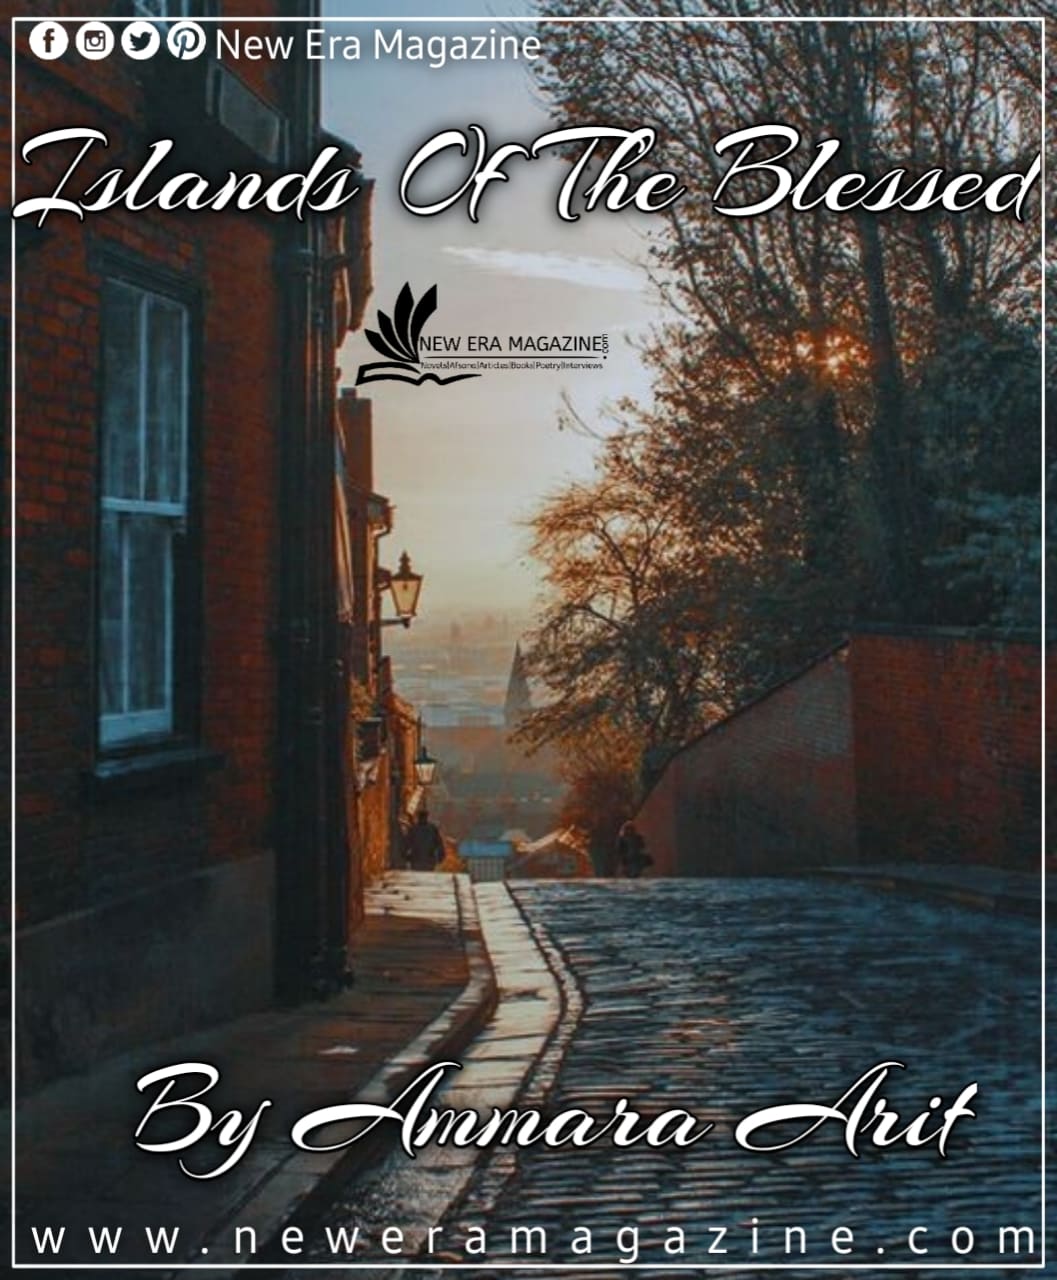 Islands Of The Blessed By Ammara Arif Complete